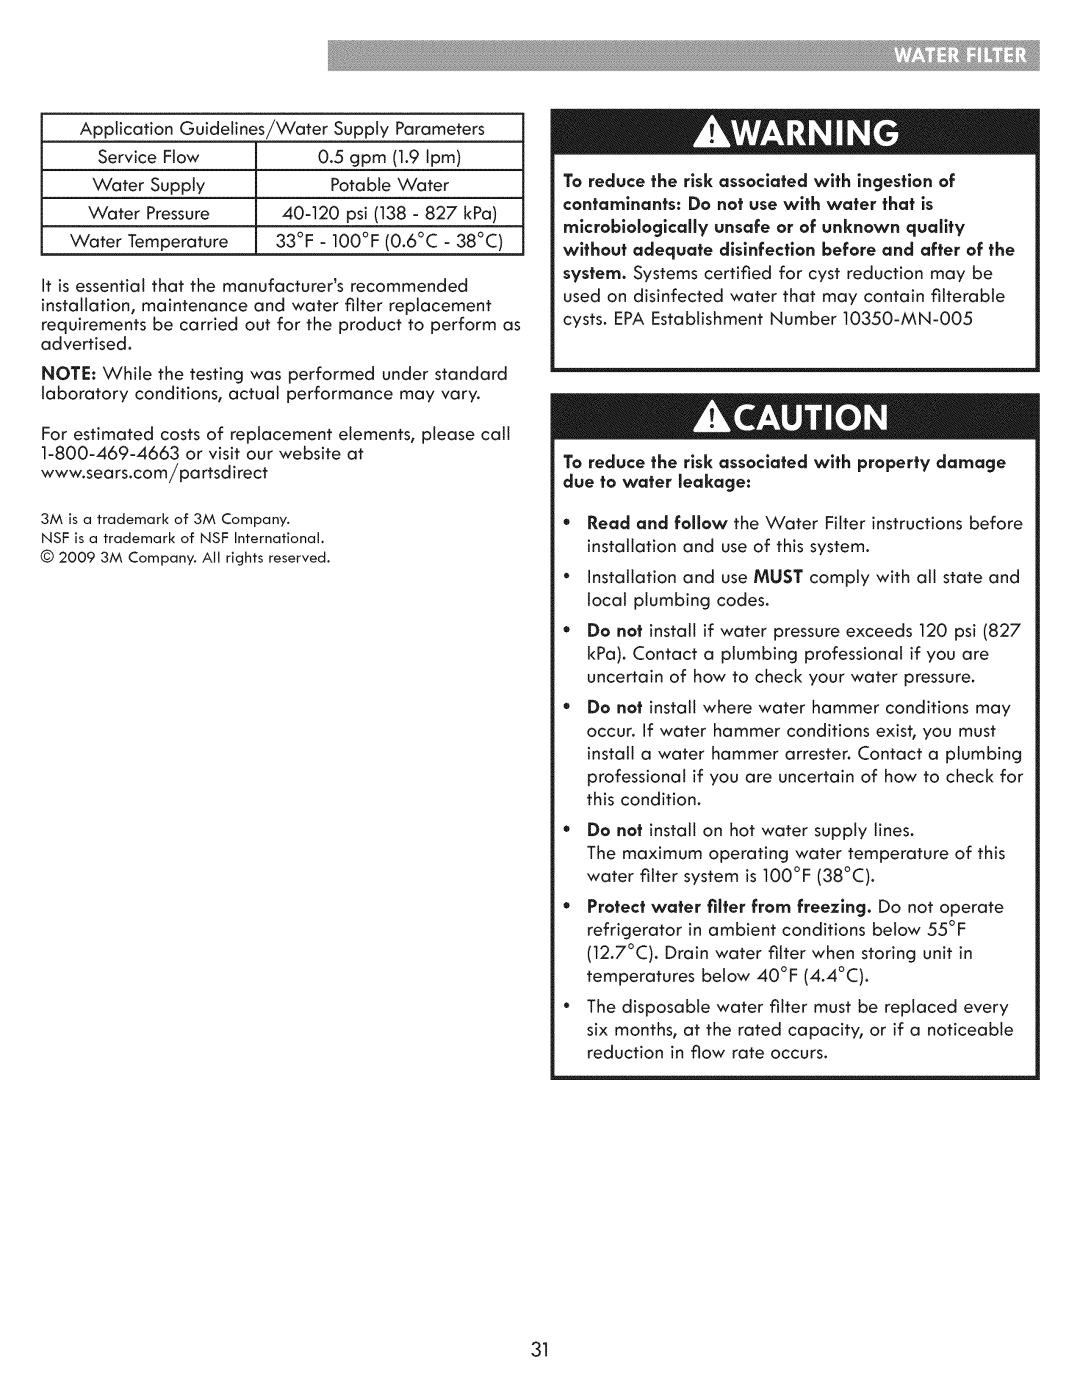 Kenmore 795.7205 manual Application Guidelines/Water Supply Parameters 